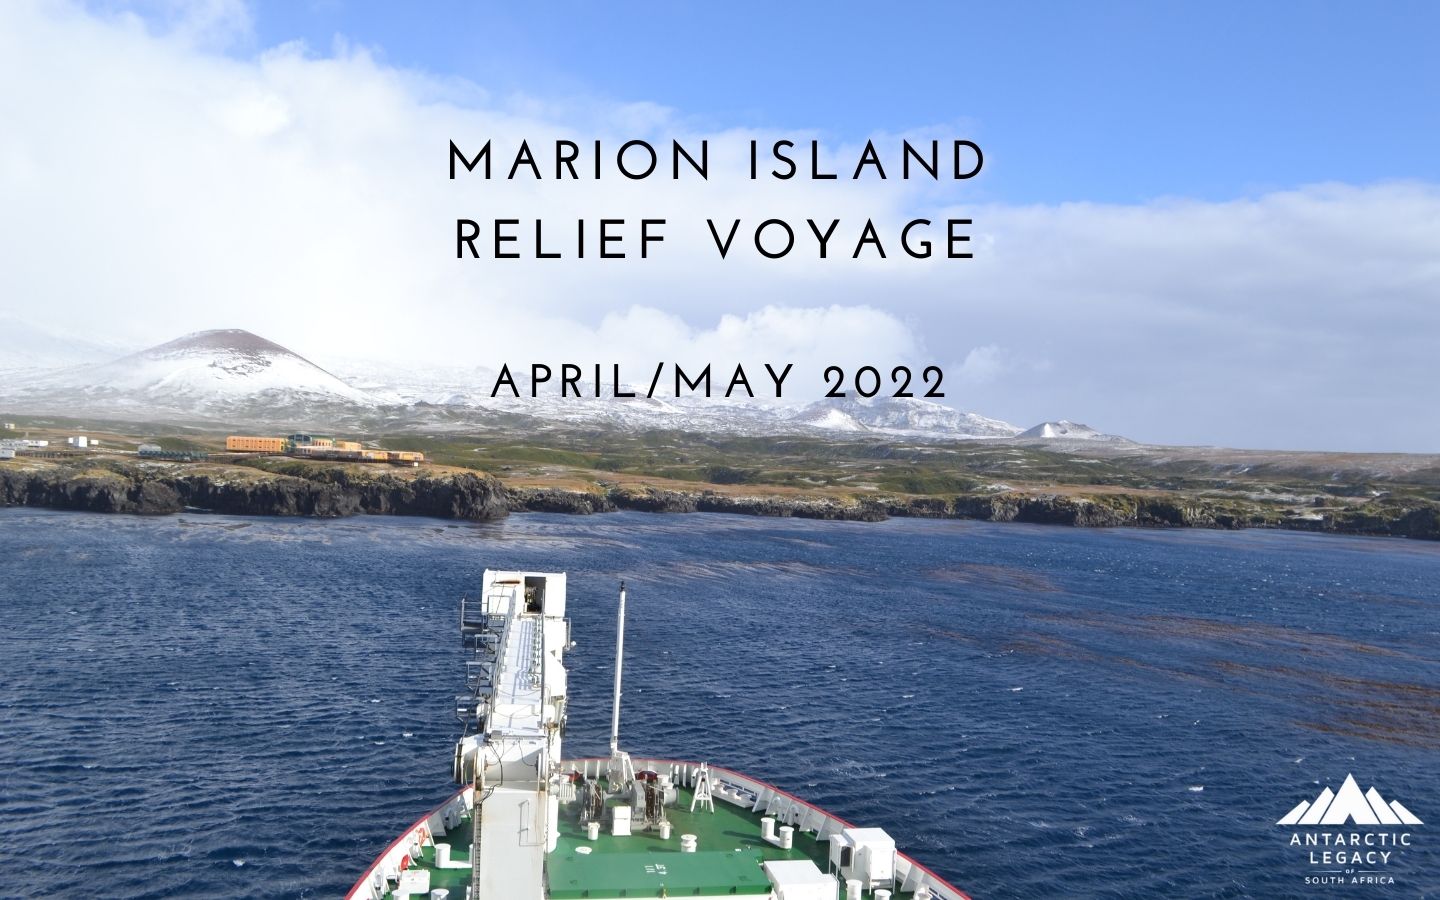 Voyage 051 – S.A. Agulhas II to Marion Island